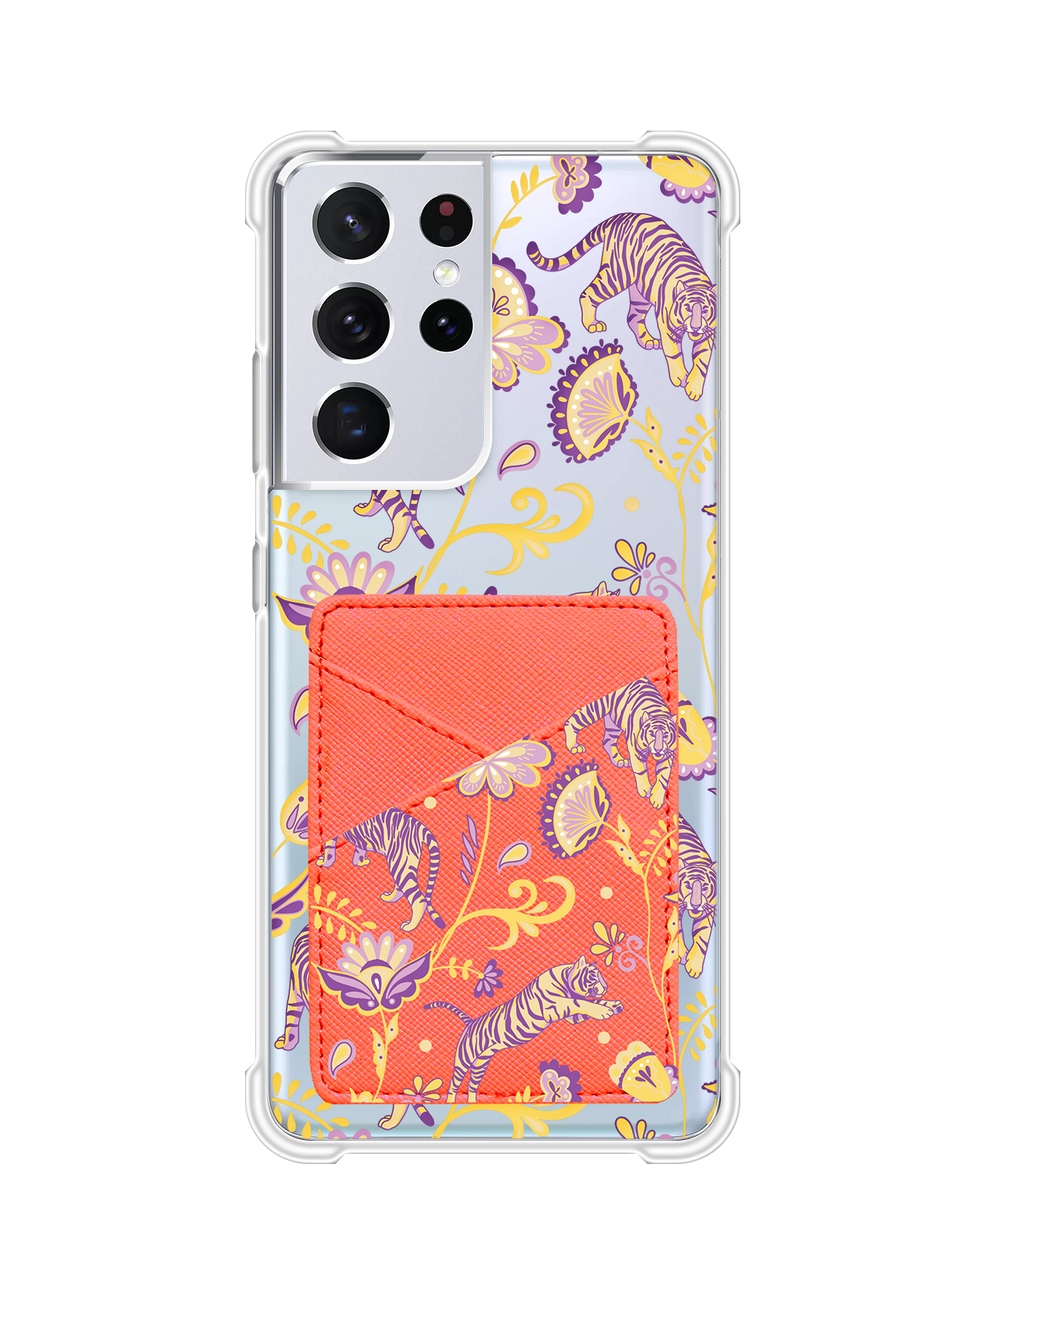 Android Phone Wallet Case - Tiger & Floral 4.0